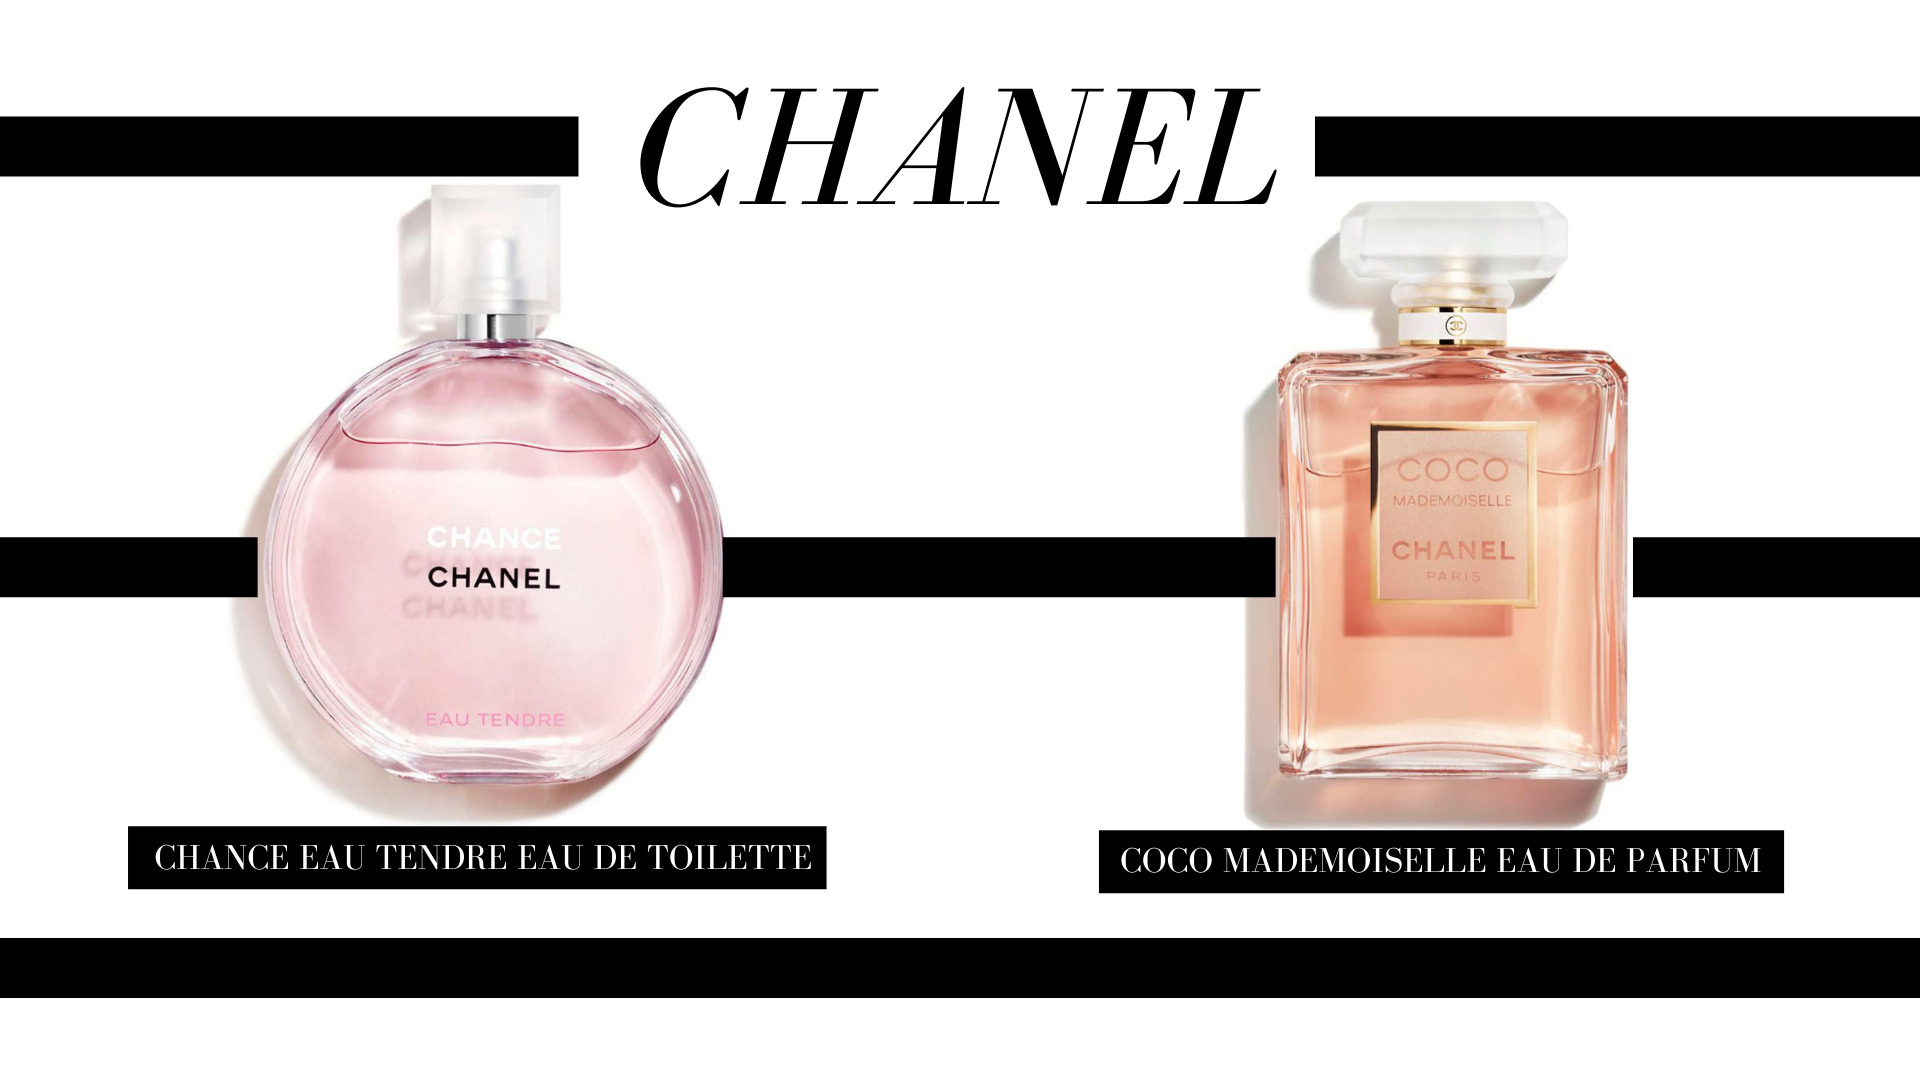 Chanel has the best fragrances! The ones that scream spring are both Chanel Chance Eau Tendre and the ICONIC Coco Mademoiselle!